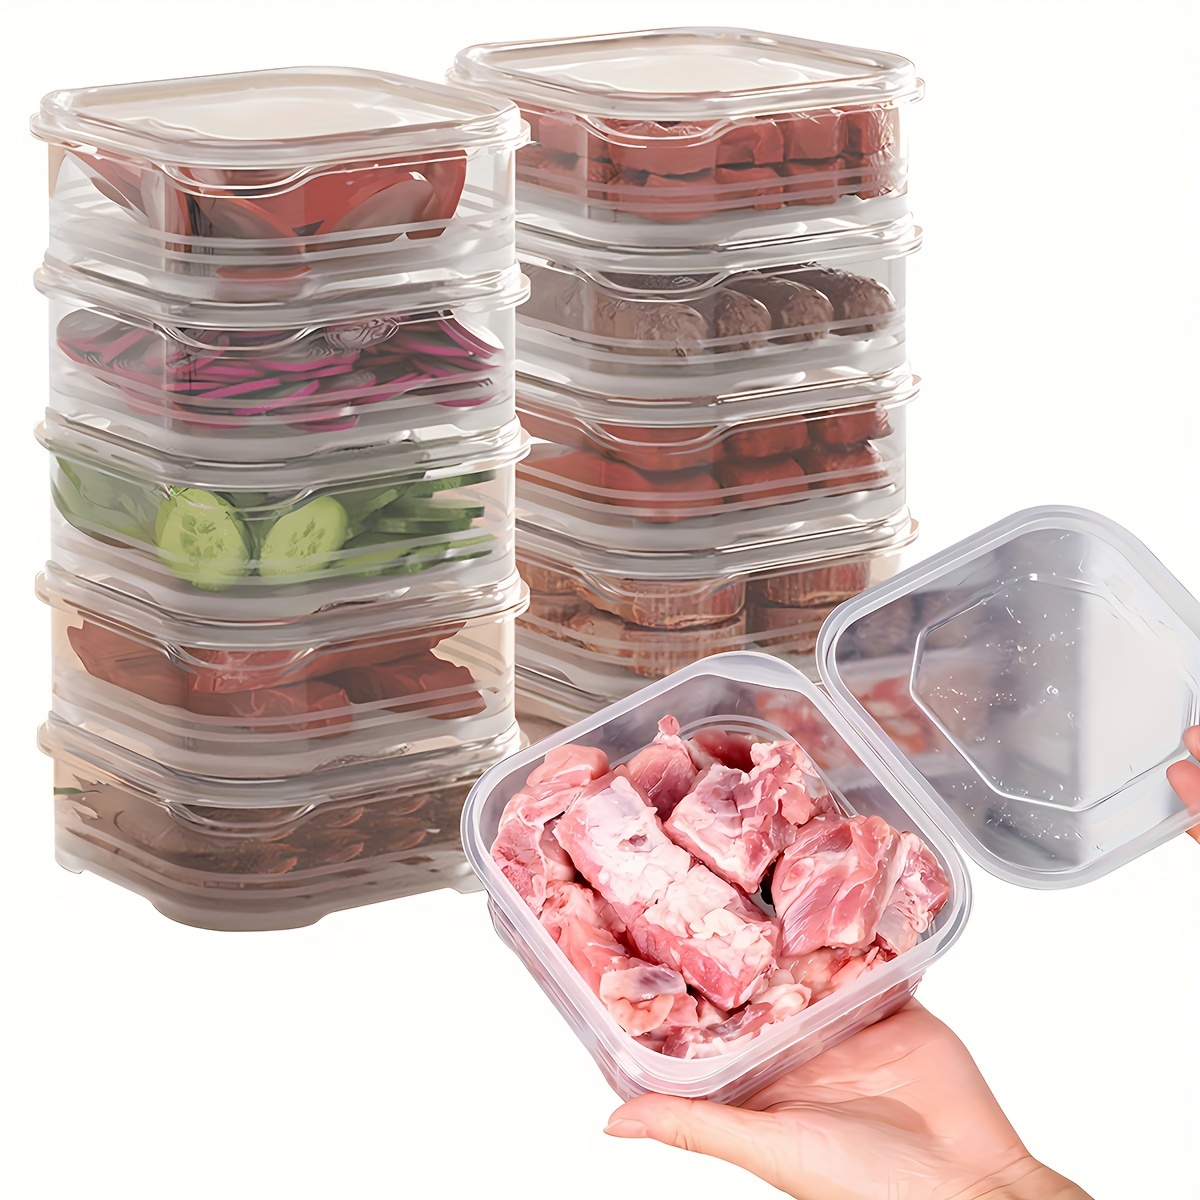 

7-piece Food Storage Container Set With Lids - Dishwasher Safe, Microwave & Freezer Friendly - Perfect For Meat, Vegetables, Rv Essentials & Camping Must-haves